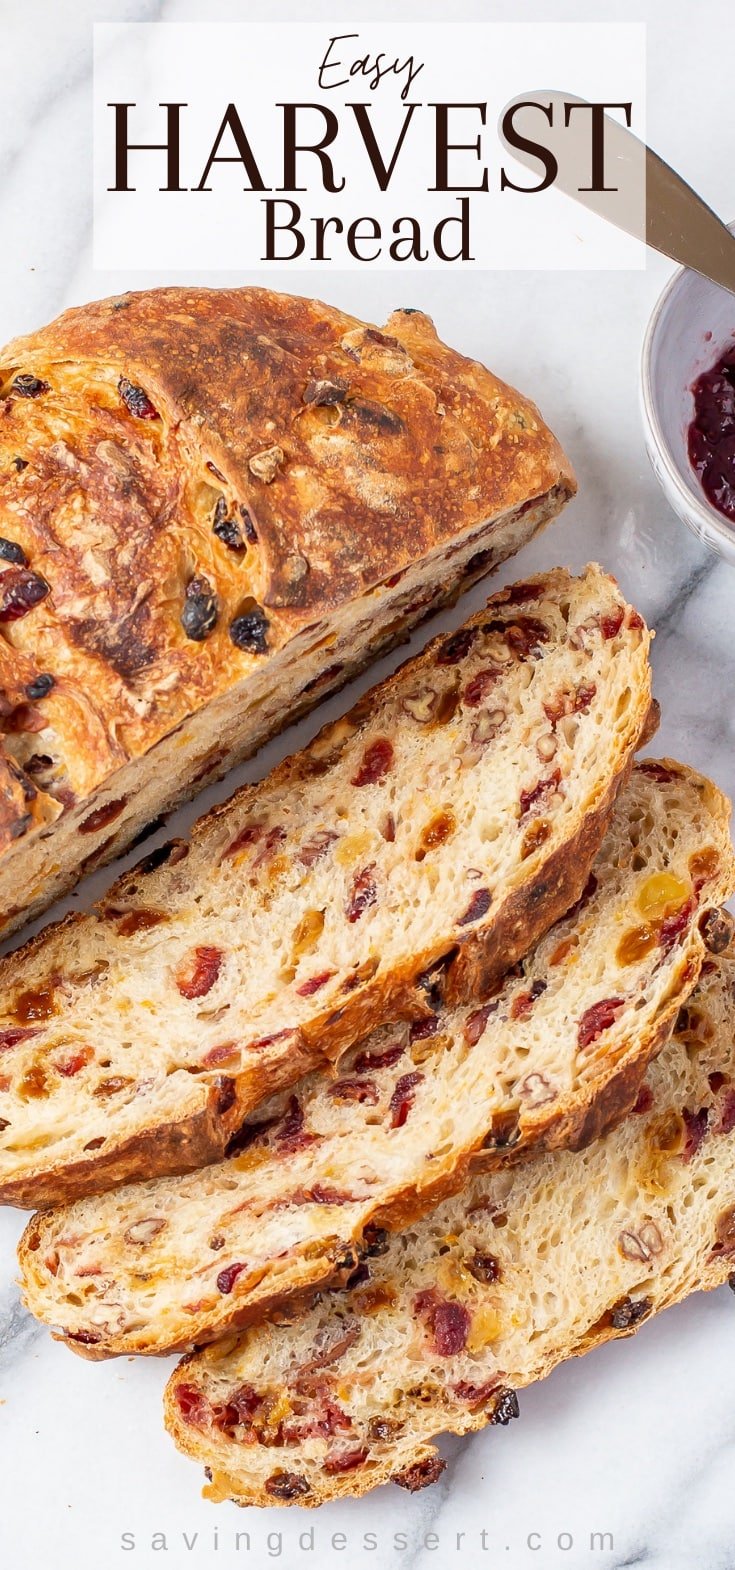 A round loaf of Harvest Bread sliced showing cranberries, nuts and raisins